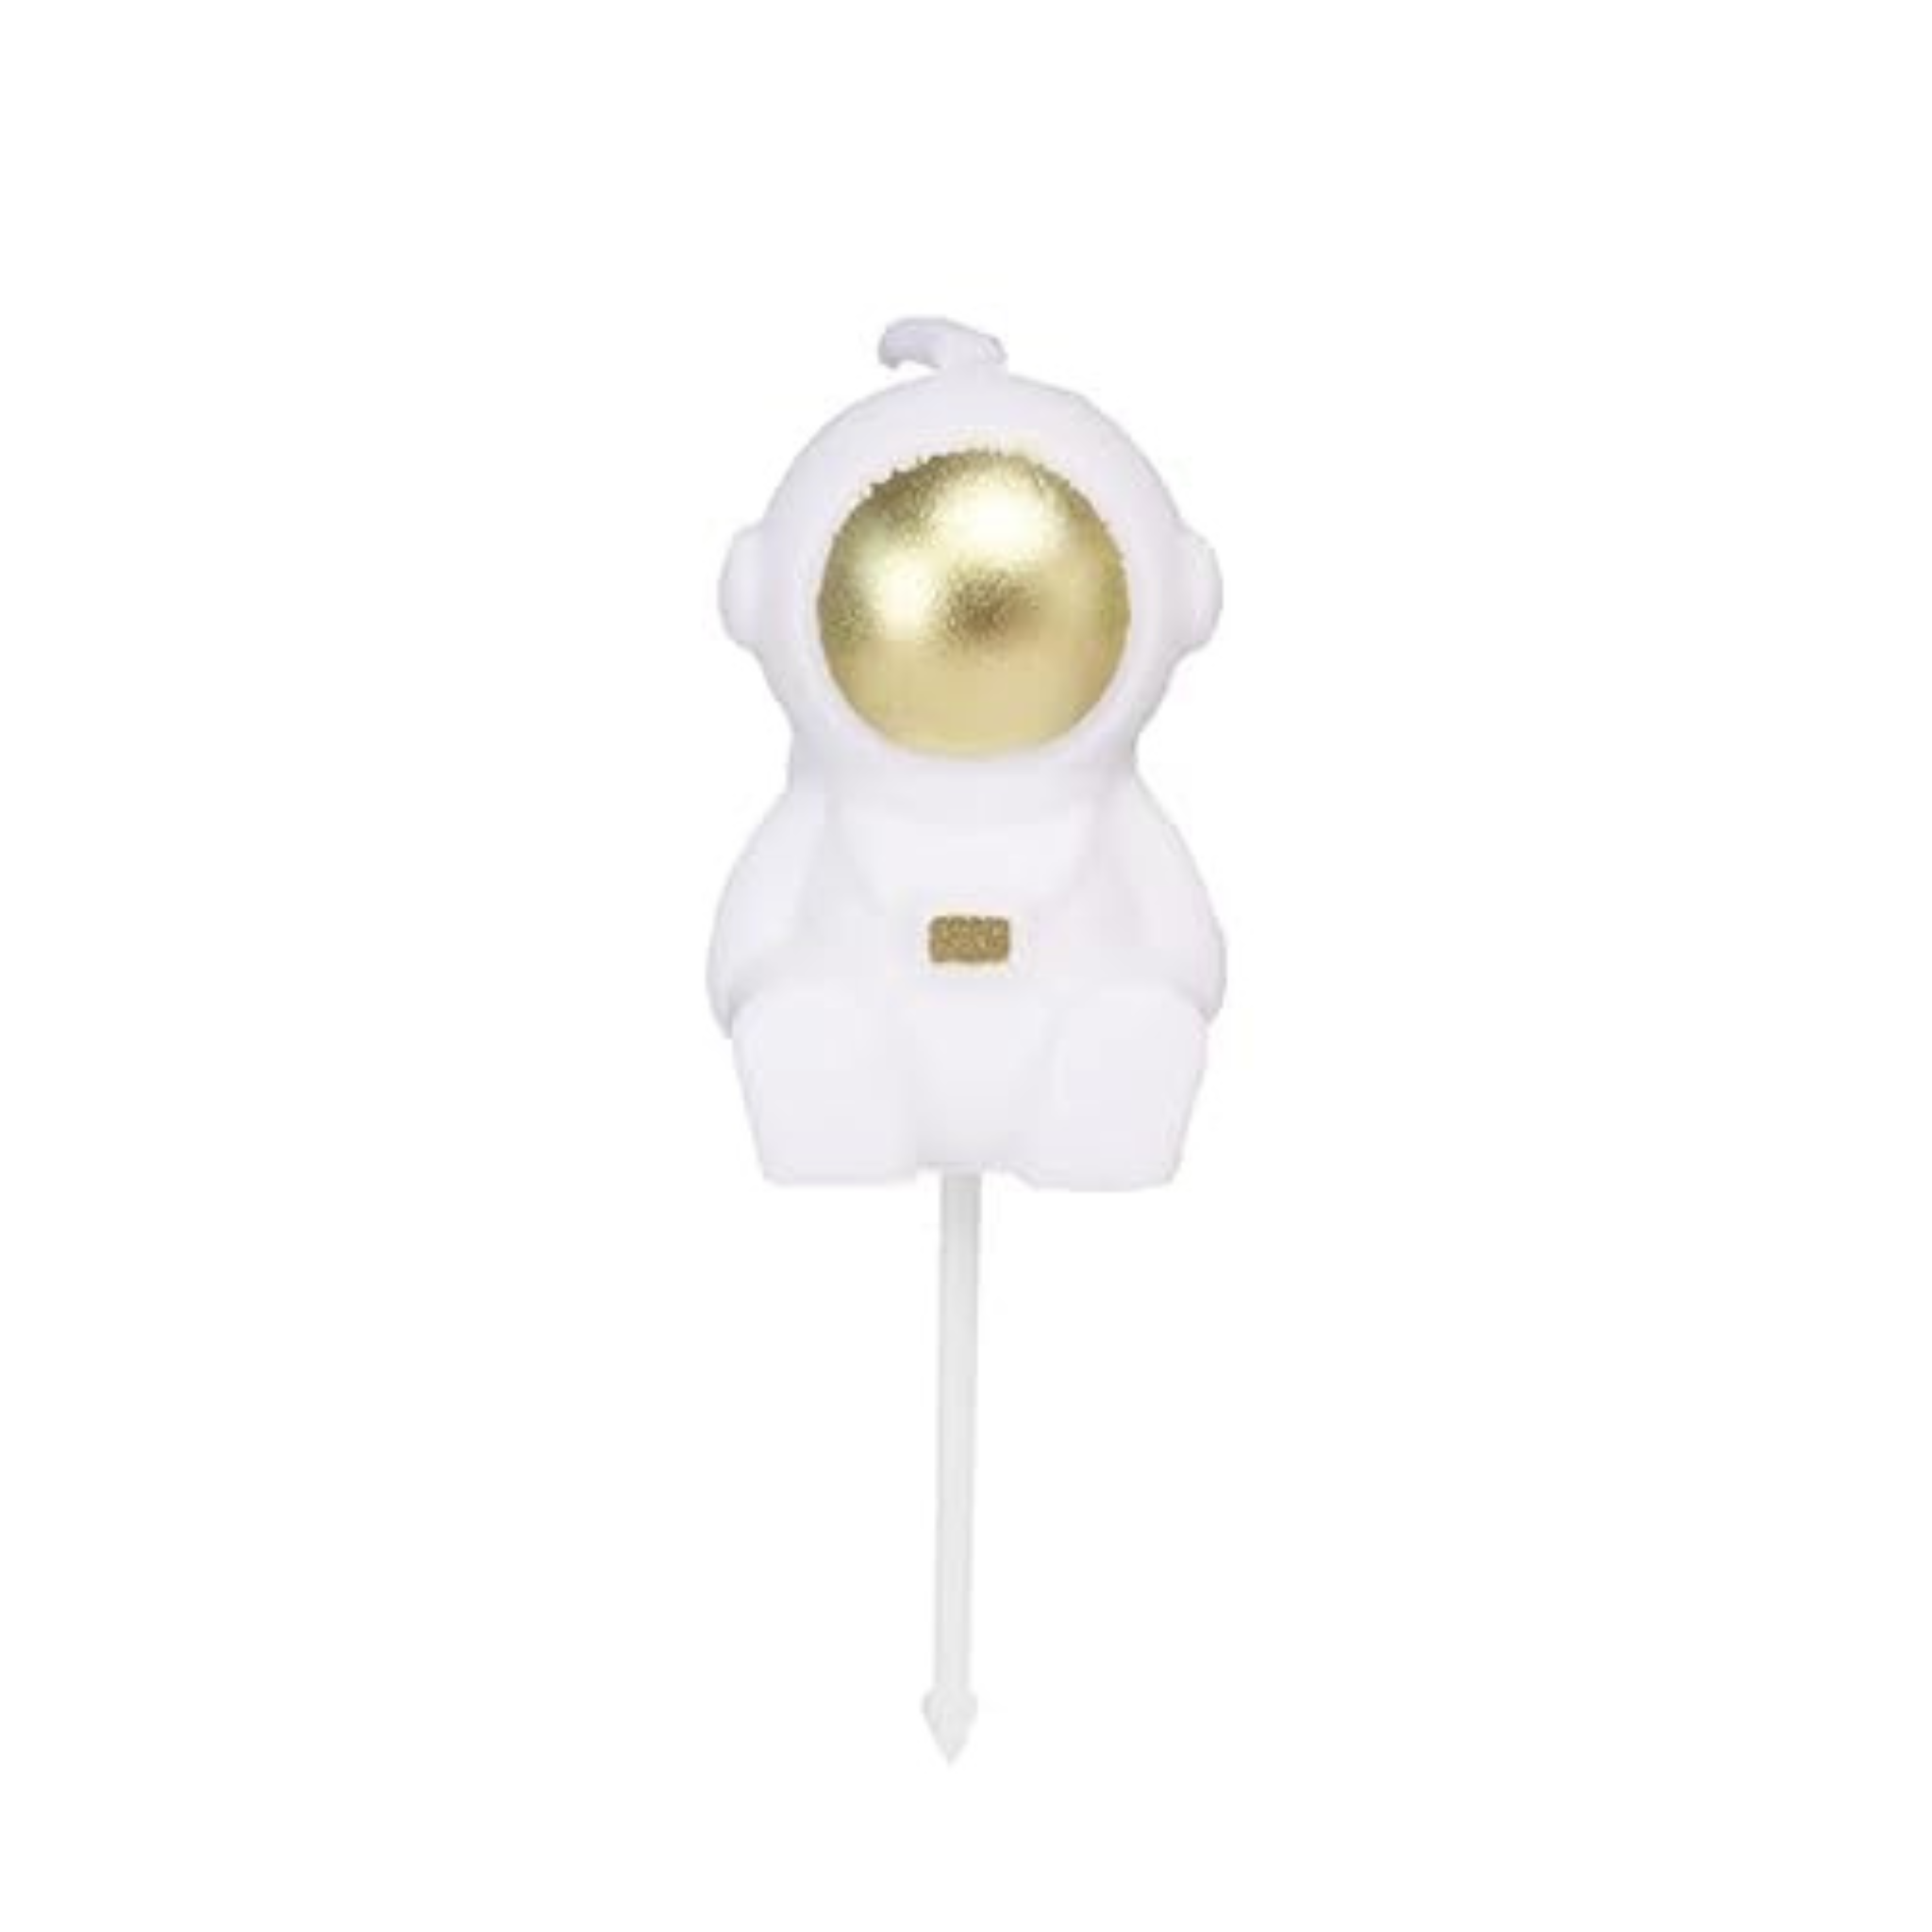 Astronaut-Shaped Outer Space Theme Birthday Candles